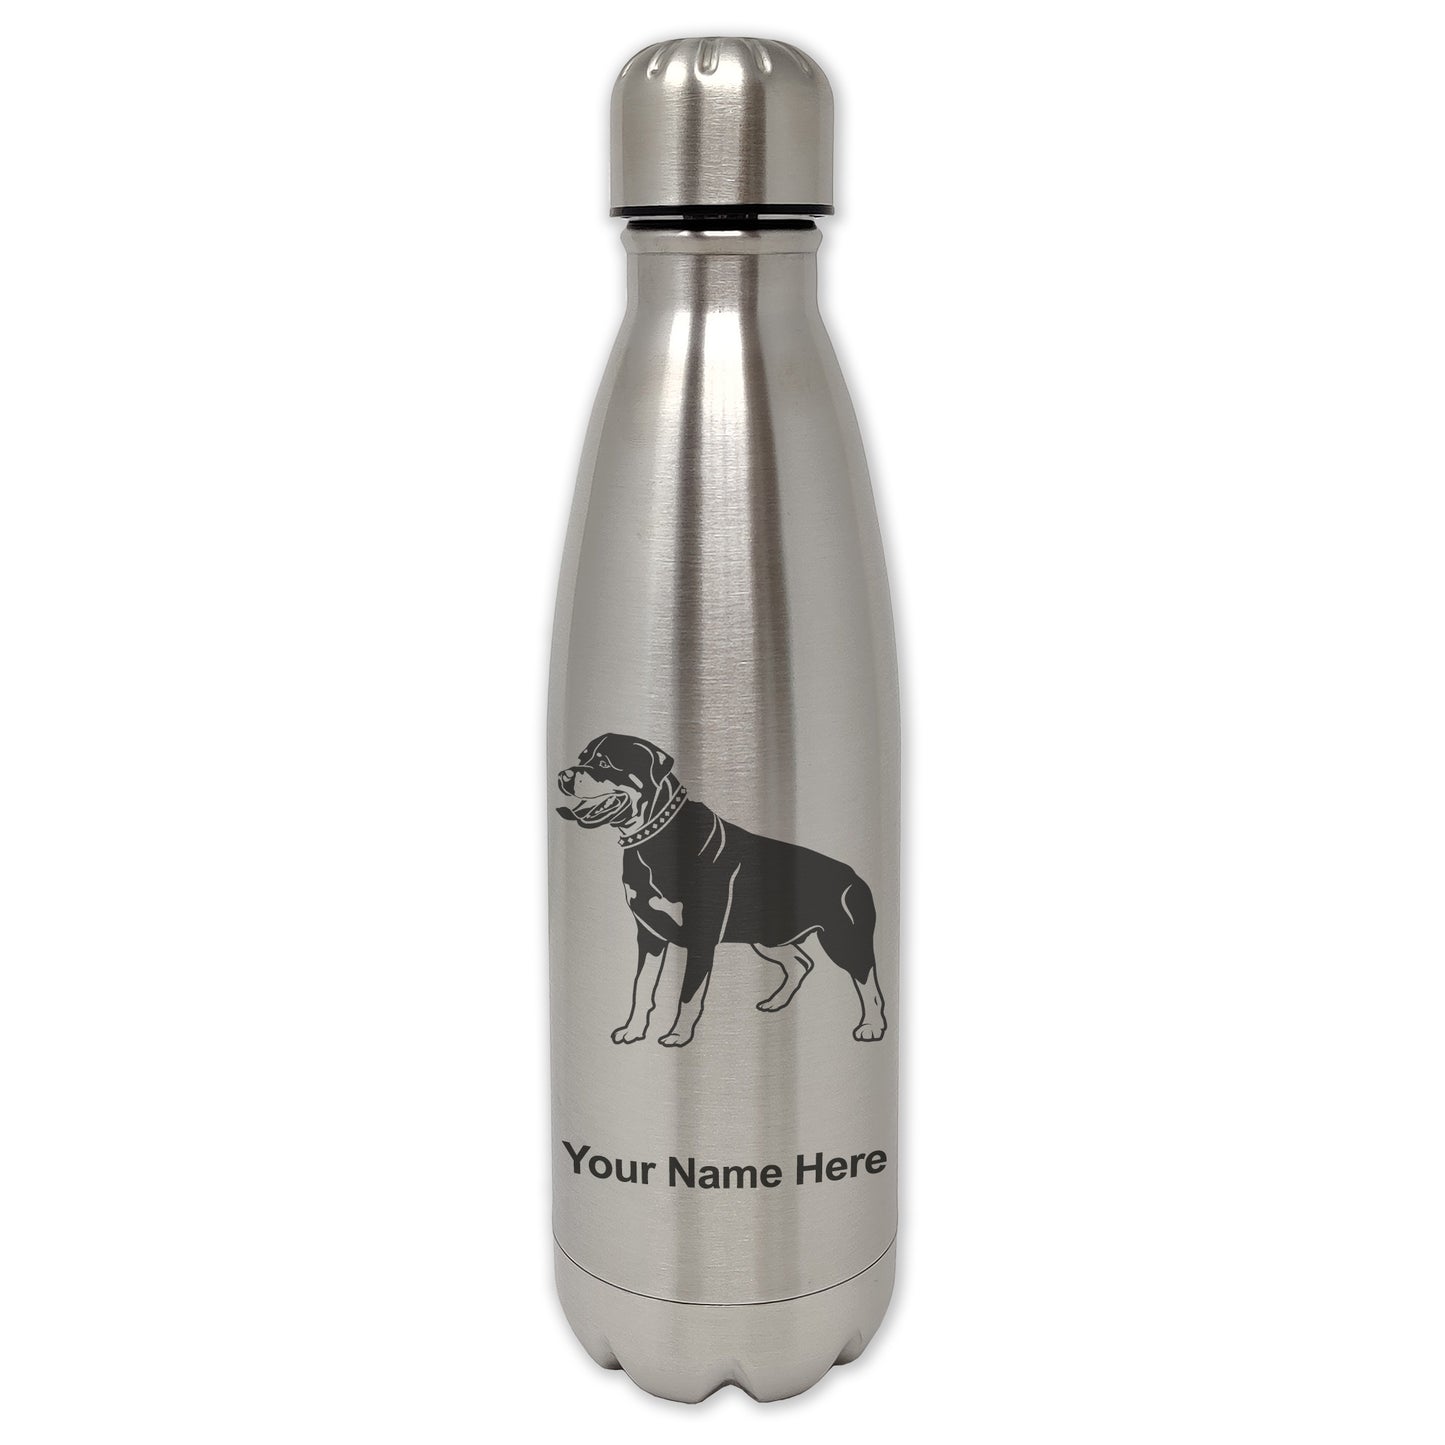 LaserGram Single Wall Water Bottle, Rottweiler Dog, Personalized Engraving Included